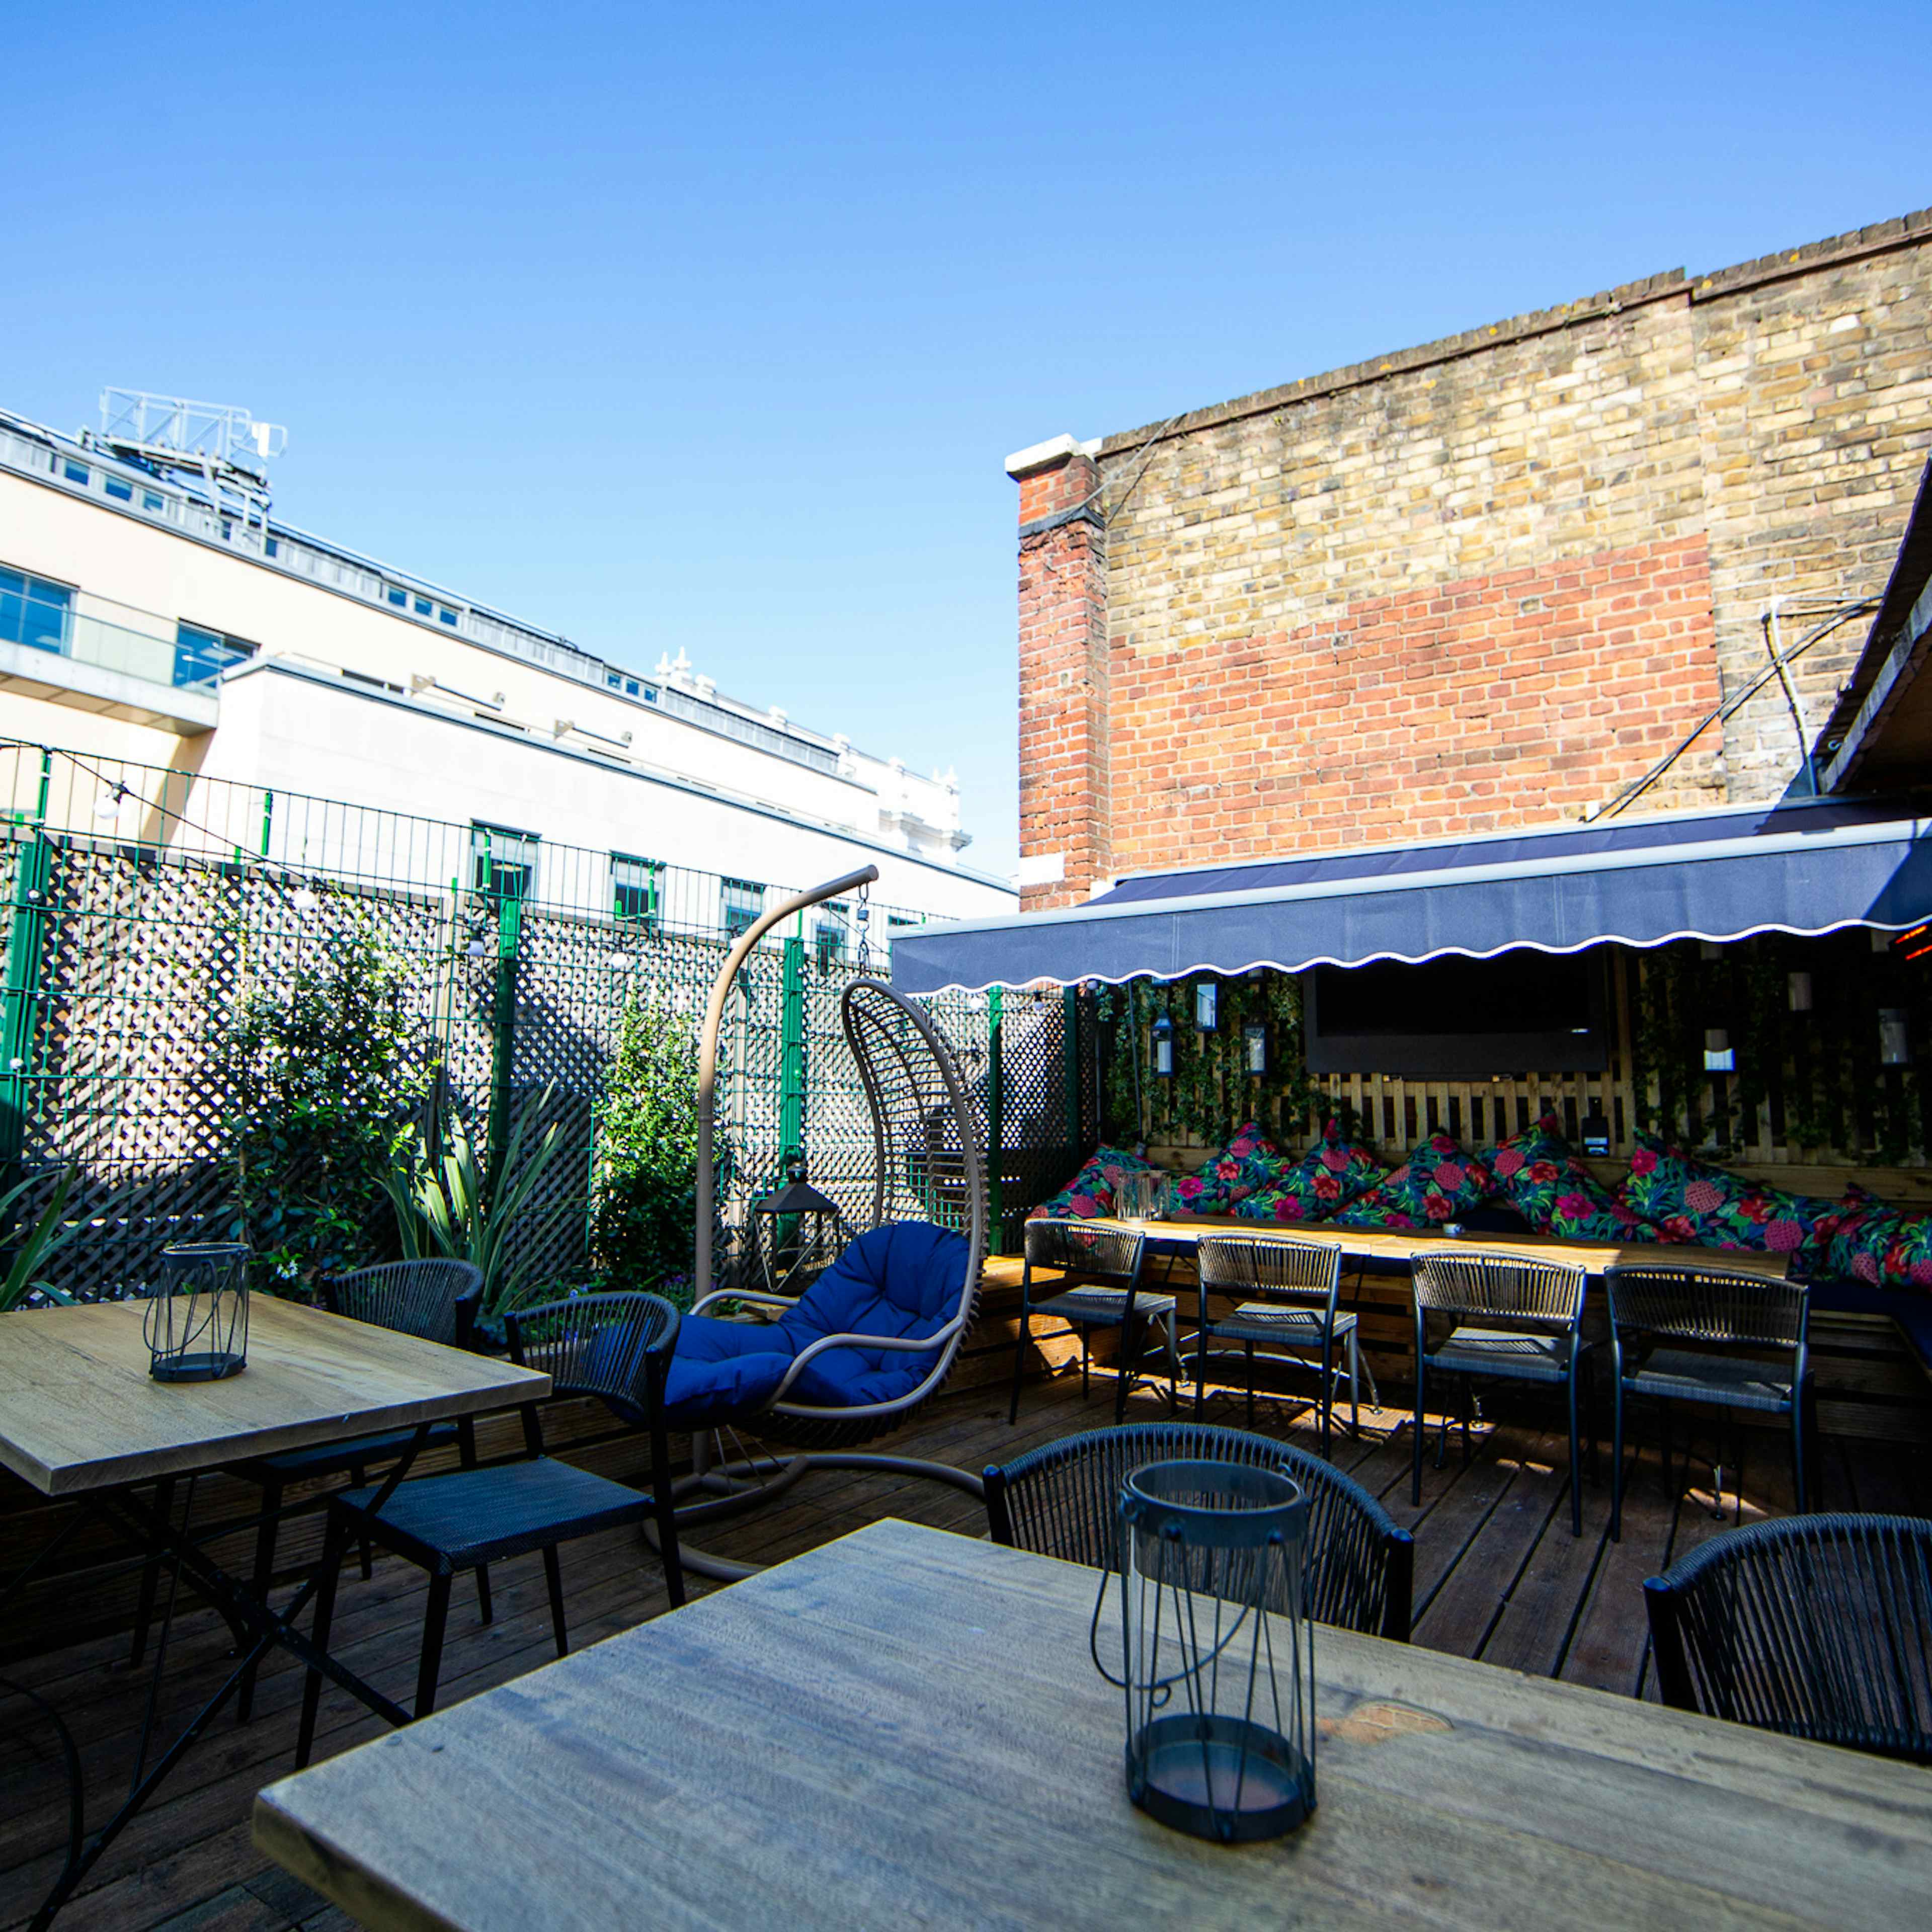 Bow Street Tavern - The Roof Terrace image 2